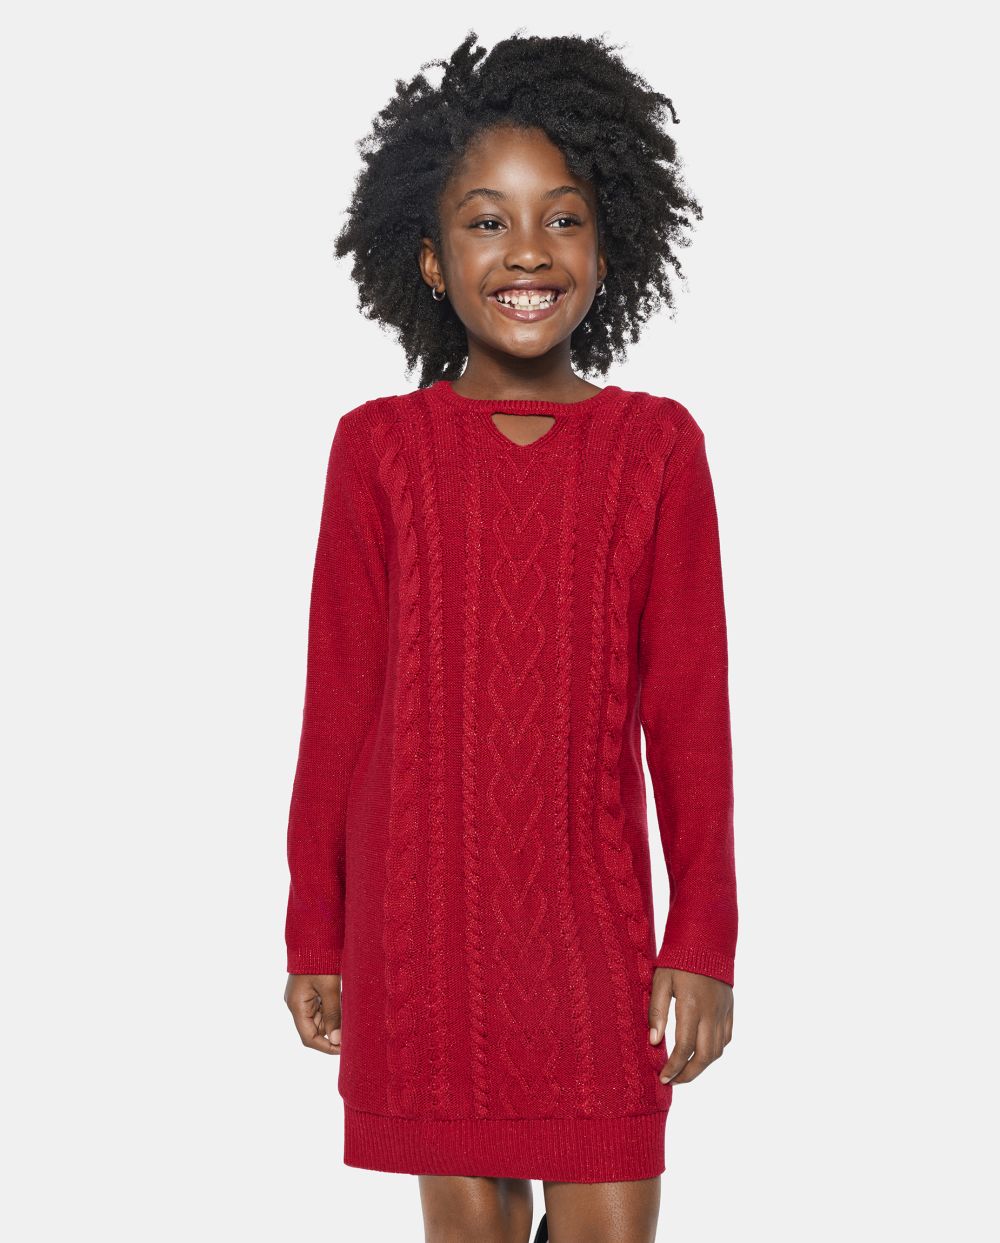 Girls Sweater Cutout Above the Knee Long Sleeves Crew Neck Dress